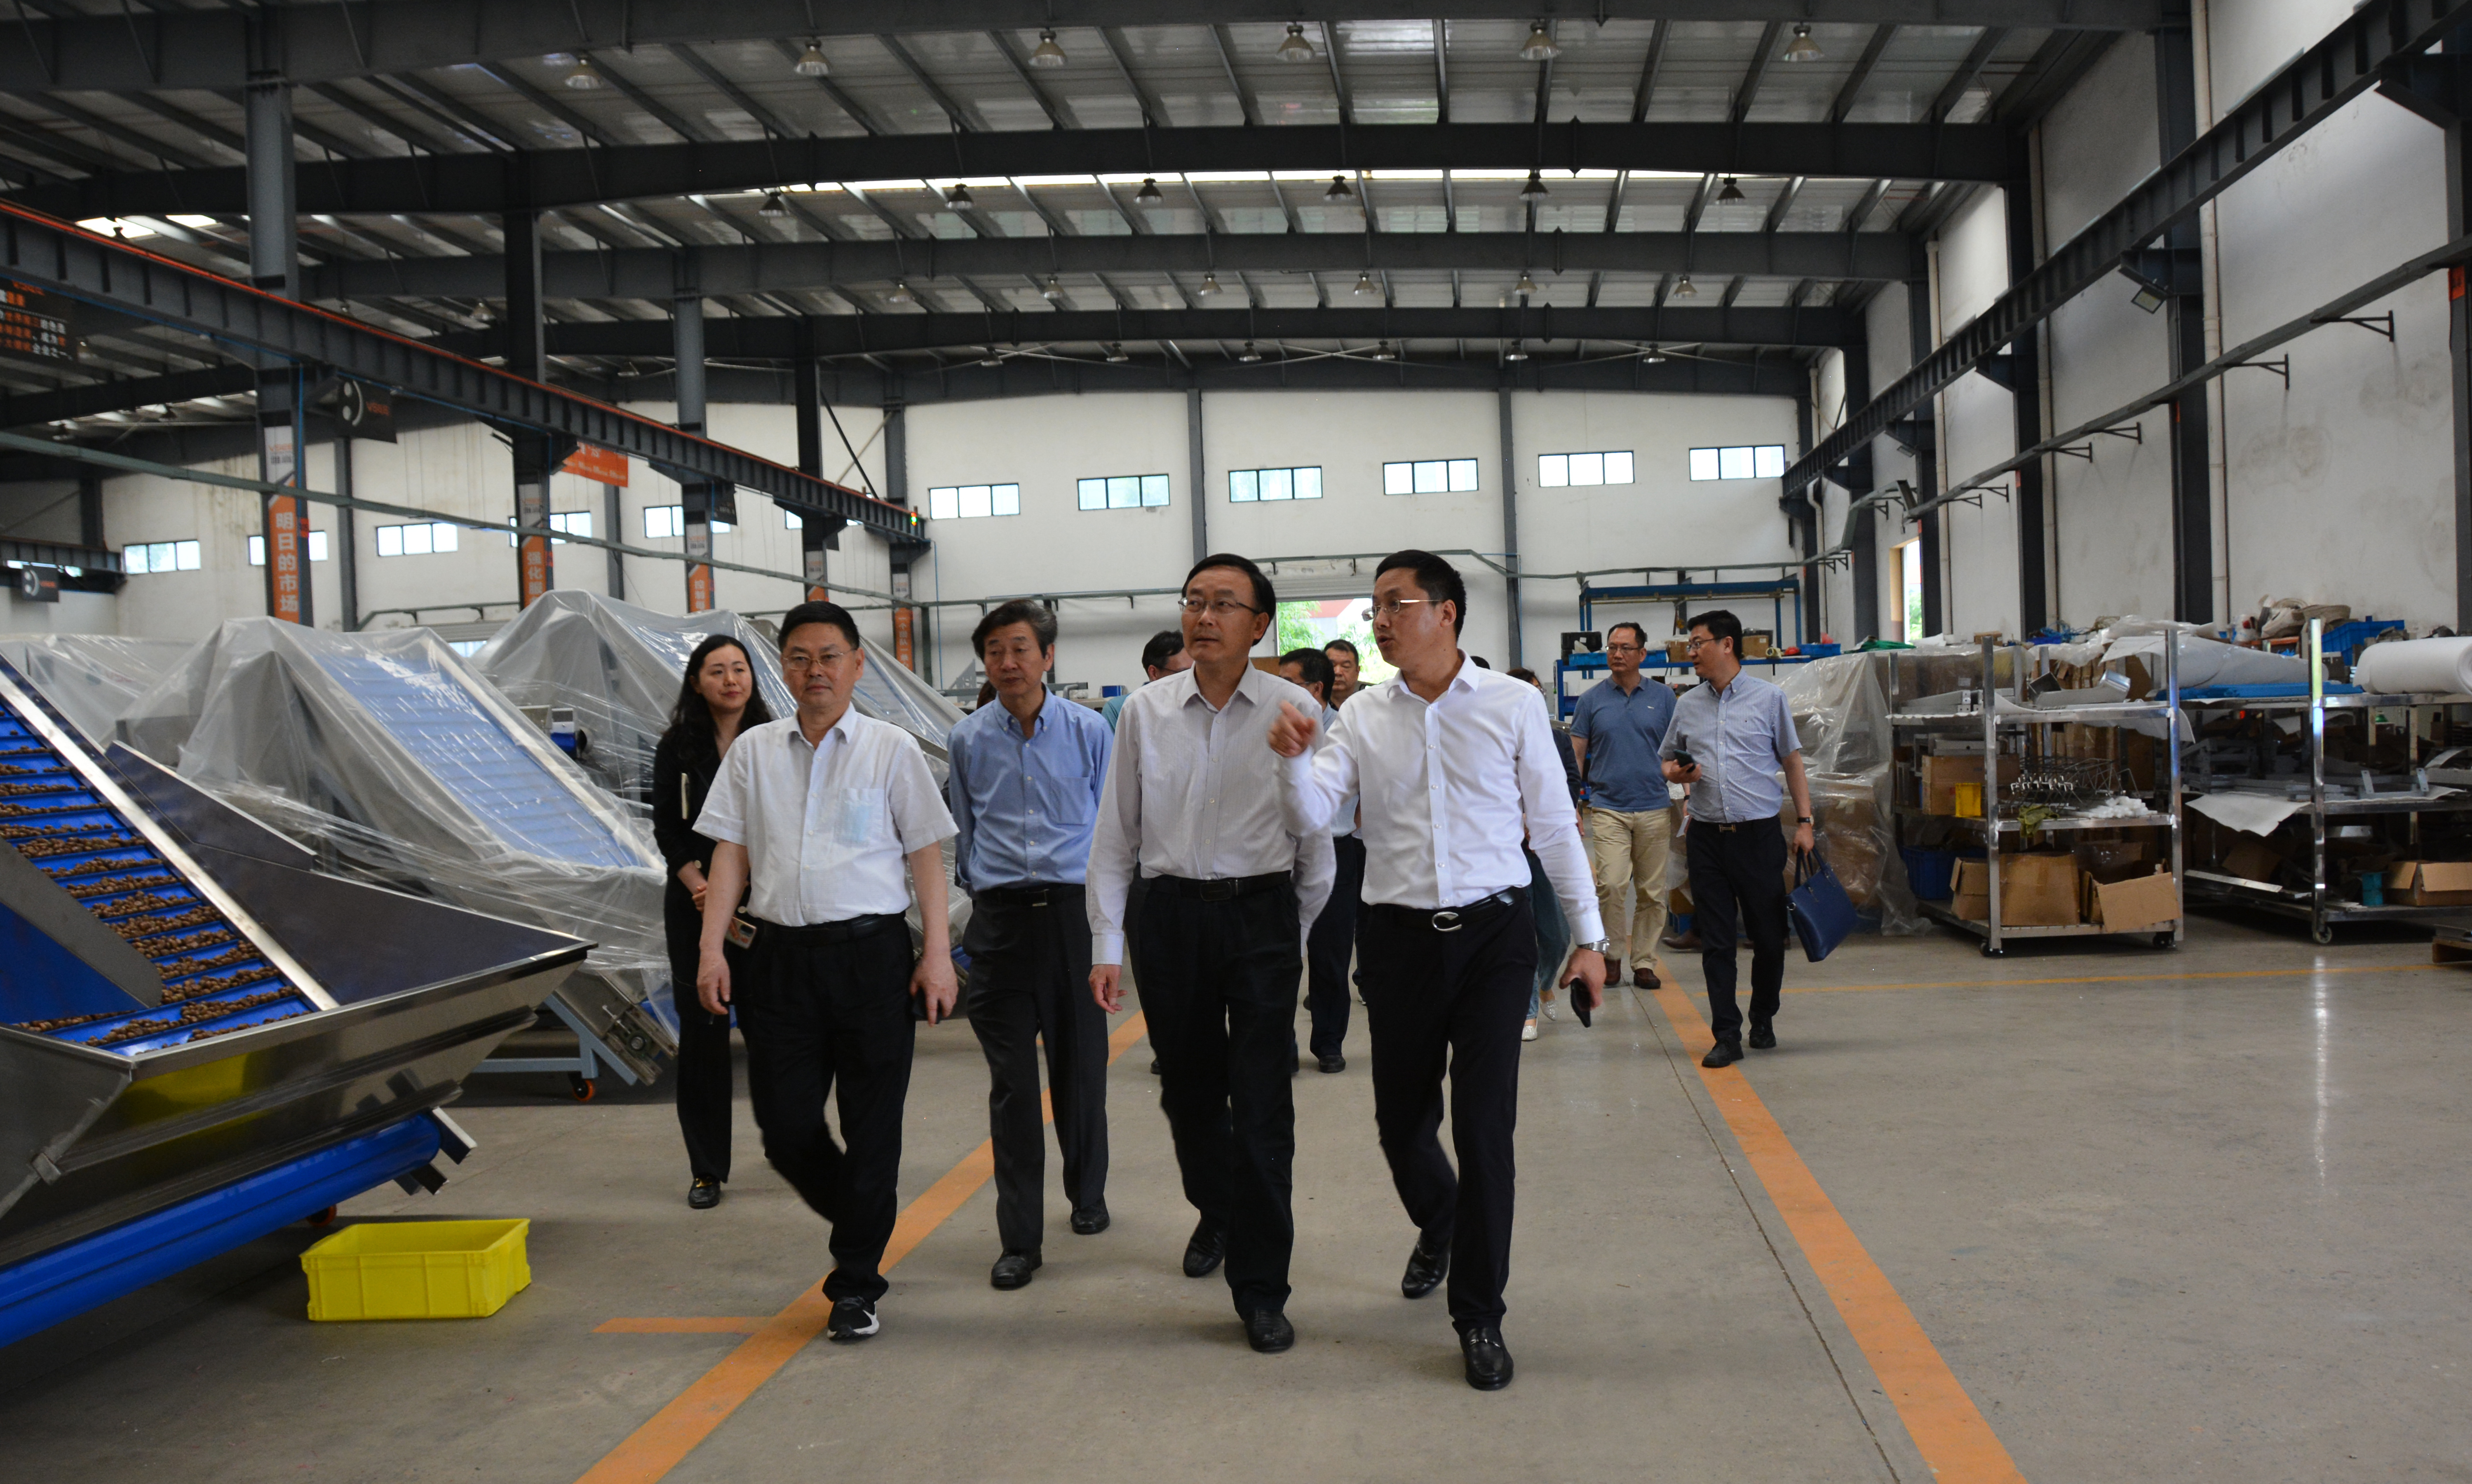 Wang Minsheng, member of the party group and vice chairman of the Hefei CPPCC, led the research team to visit VSEE for investigation and research